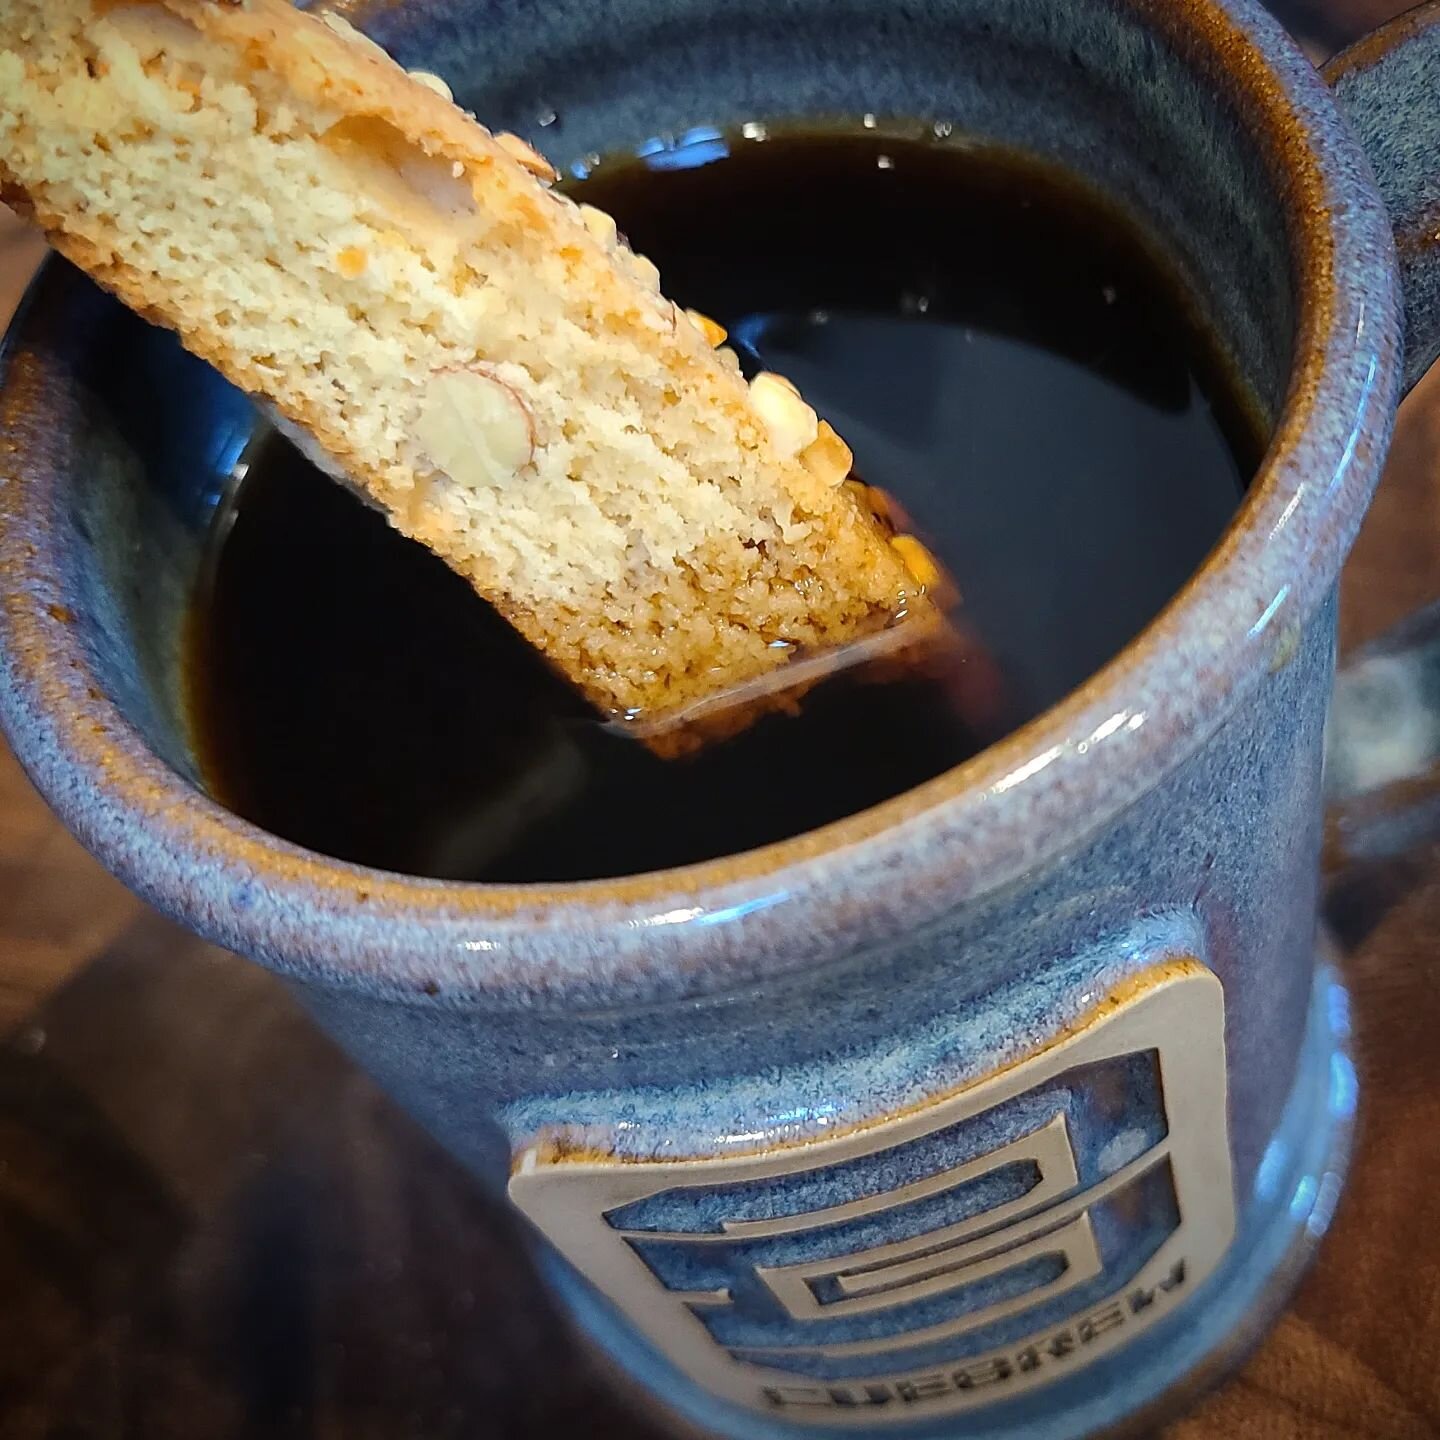 Quick dip. Love pairing our Sumatran with things that have a little sweetness. Even more so when you can dip it!

#coffee #cuebrew #coffeeroaster #coffeetime #smallbatchcoffee #shopsmall #smallbusiness #roswellga #summercoffee #icedcoffee #coldbrew #